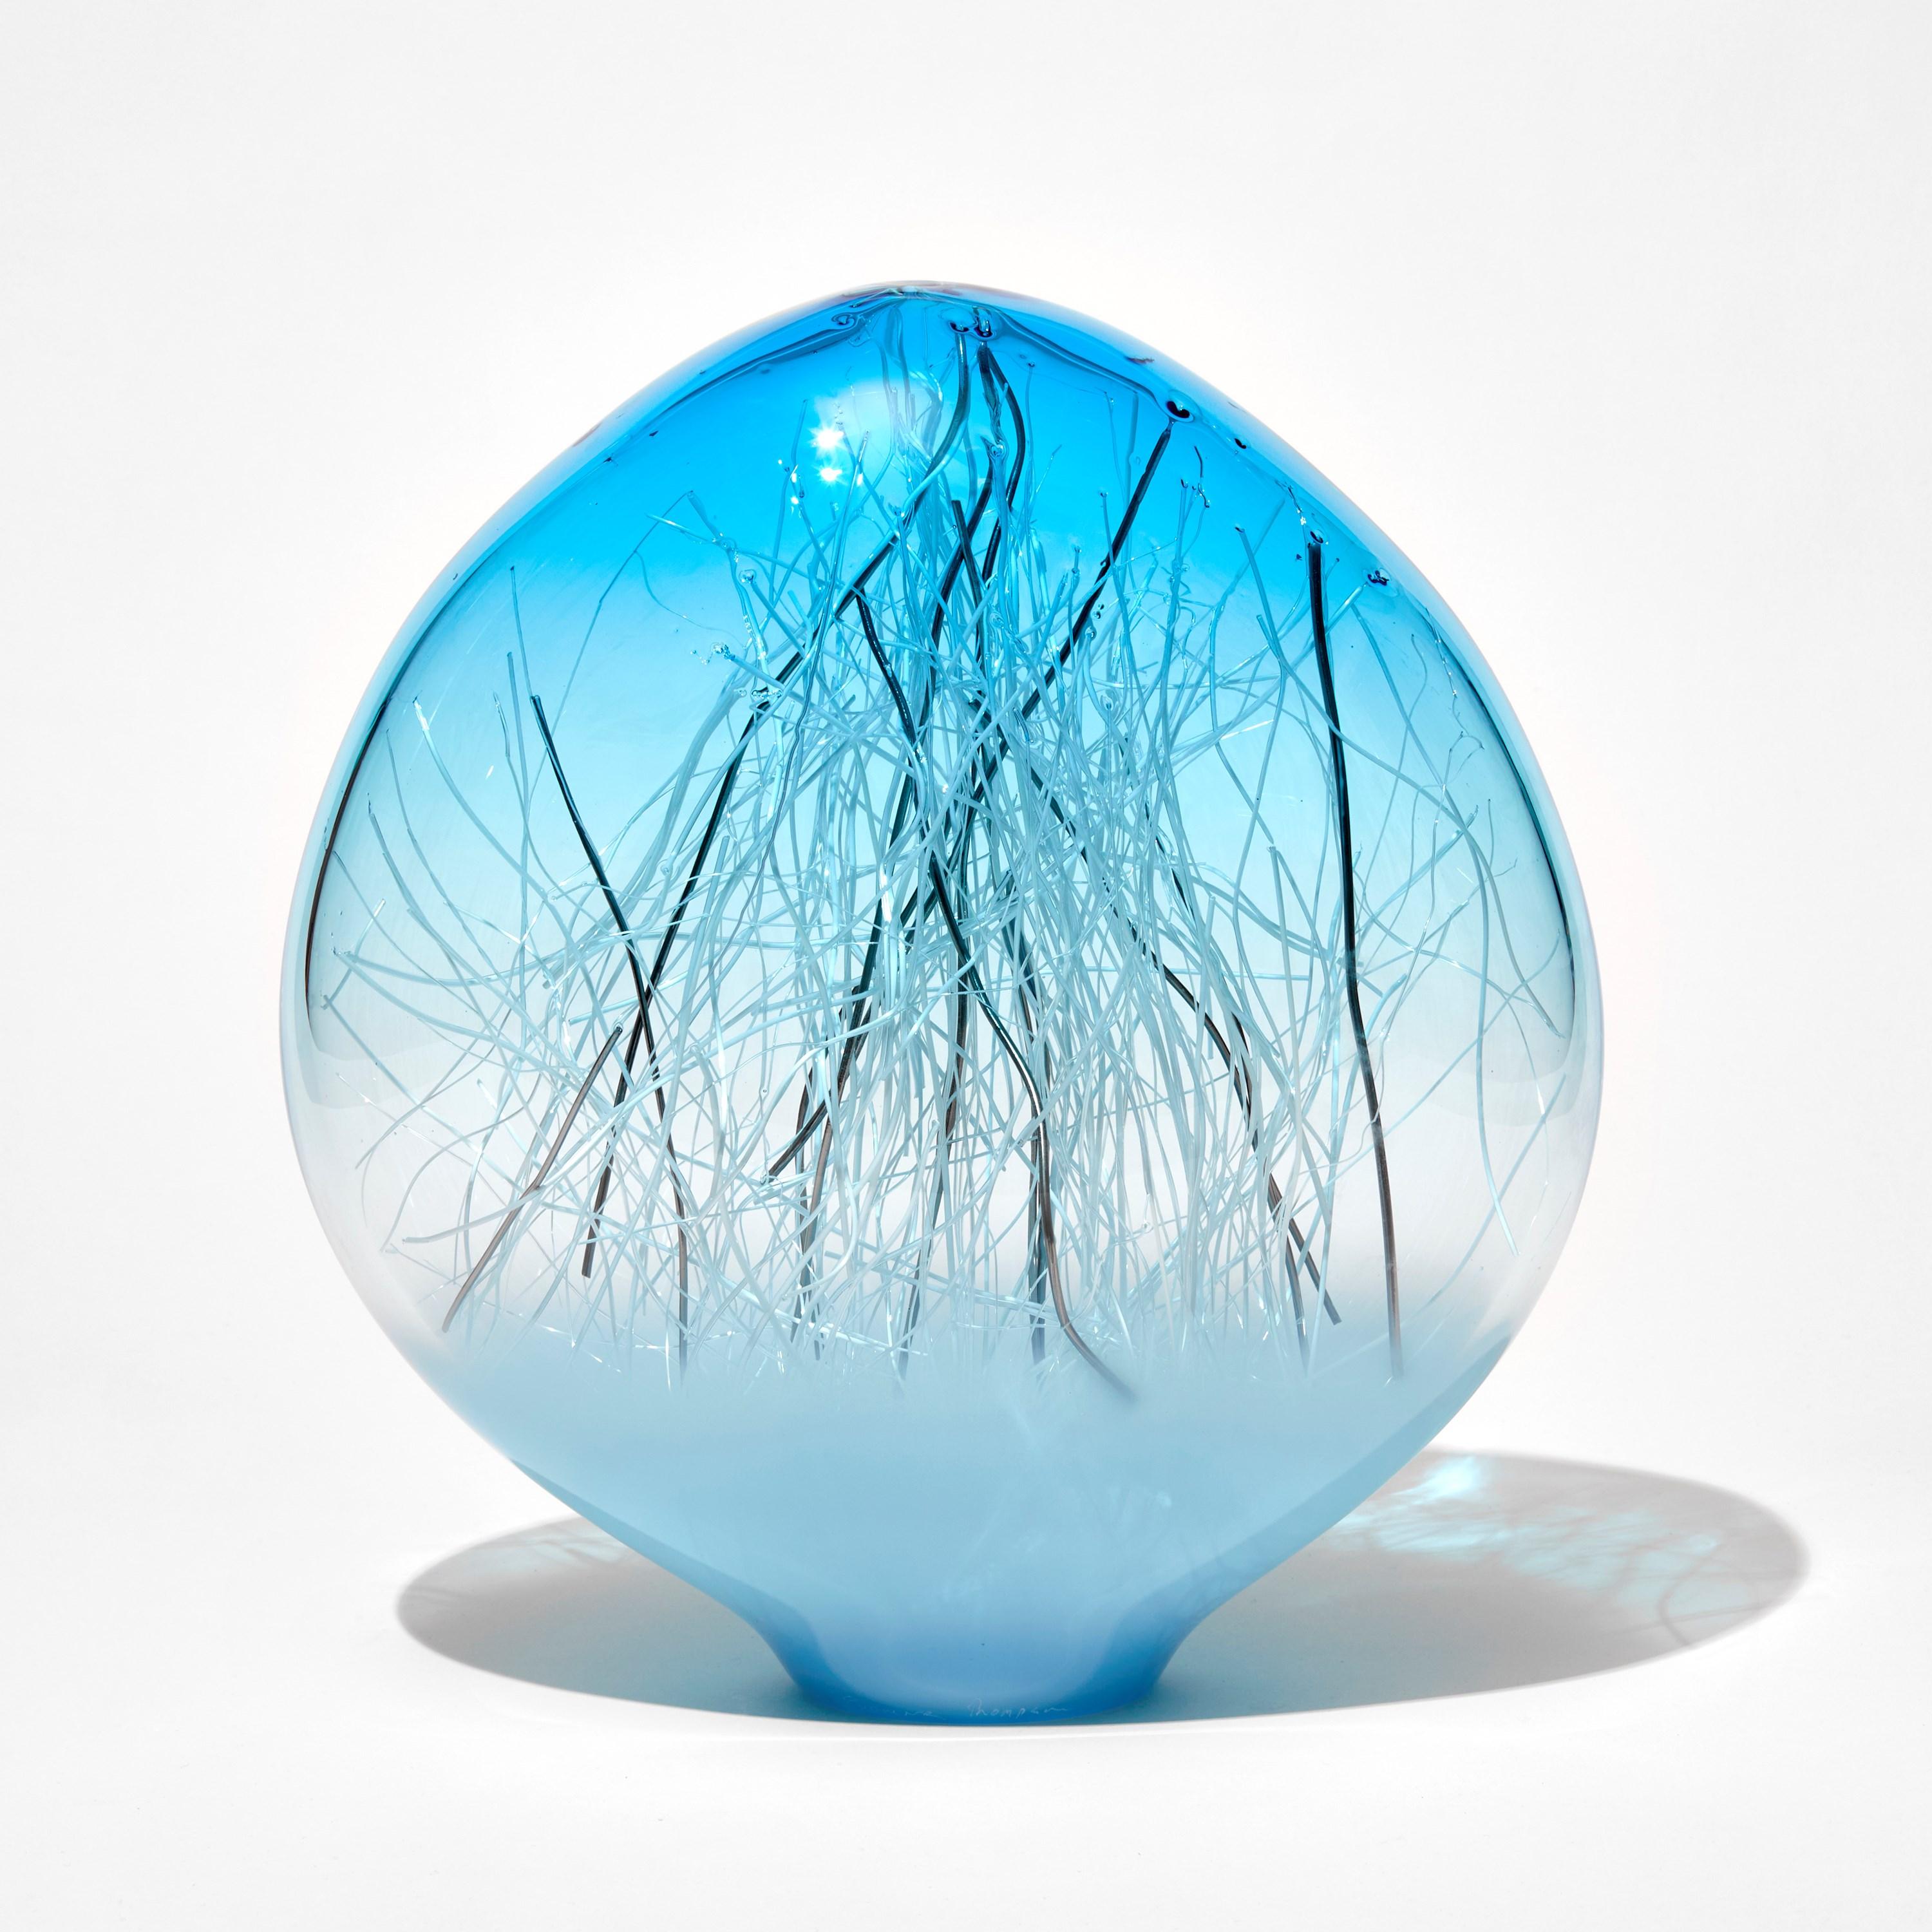 'Ore in Copper Blue & Pale Turquoise and Platinum' is a unique glass sculpture by the collaborative artists Hanne Enemark (Danish) and Louis Thompson (British). The outer glass form contains a multitude of fine white canes of glass, some of which